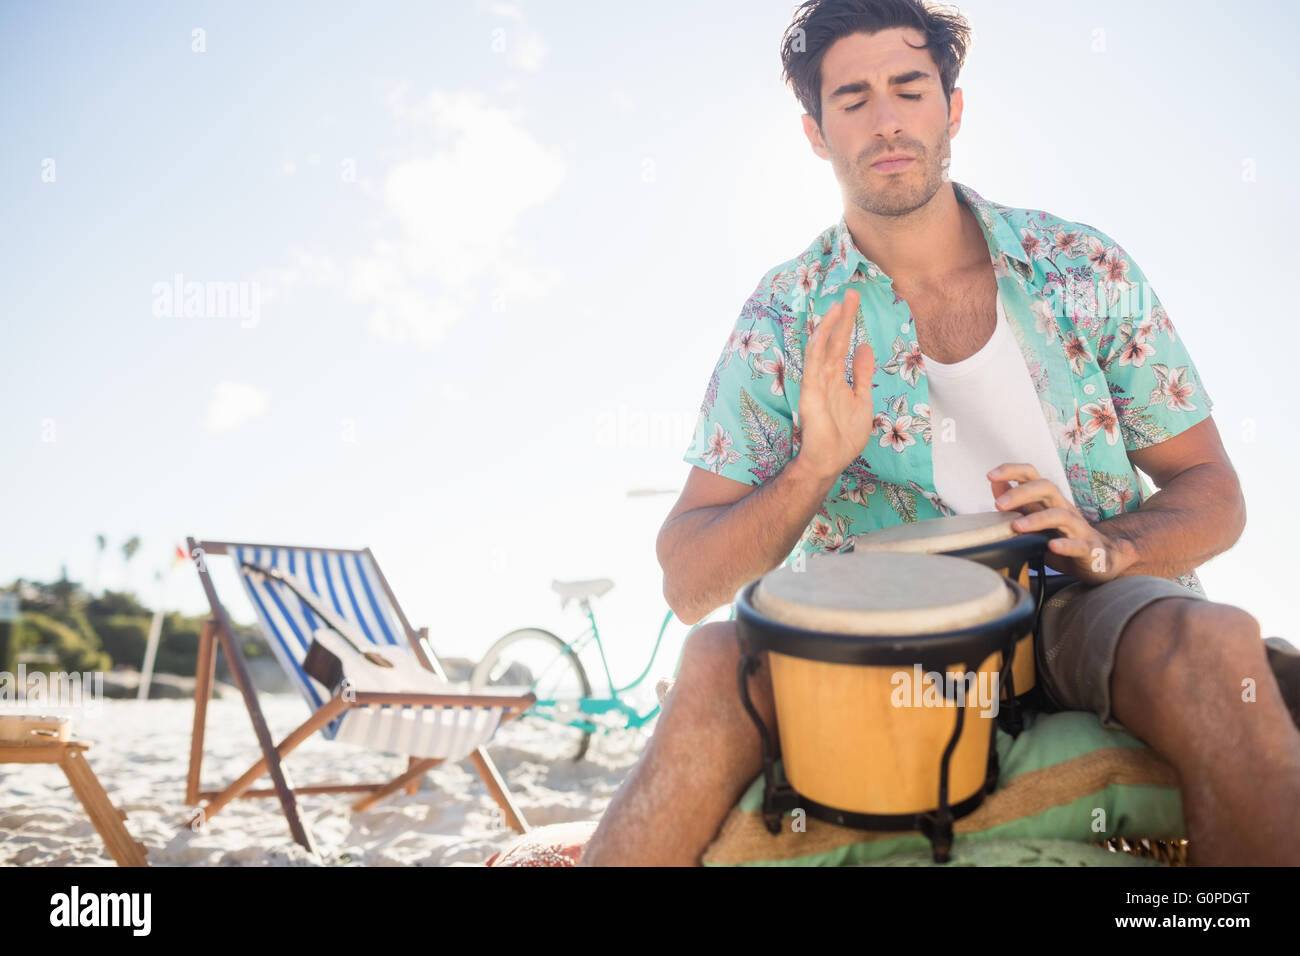 Passionate man playing drums Stock Photo